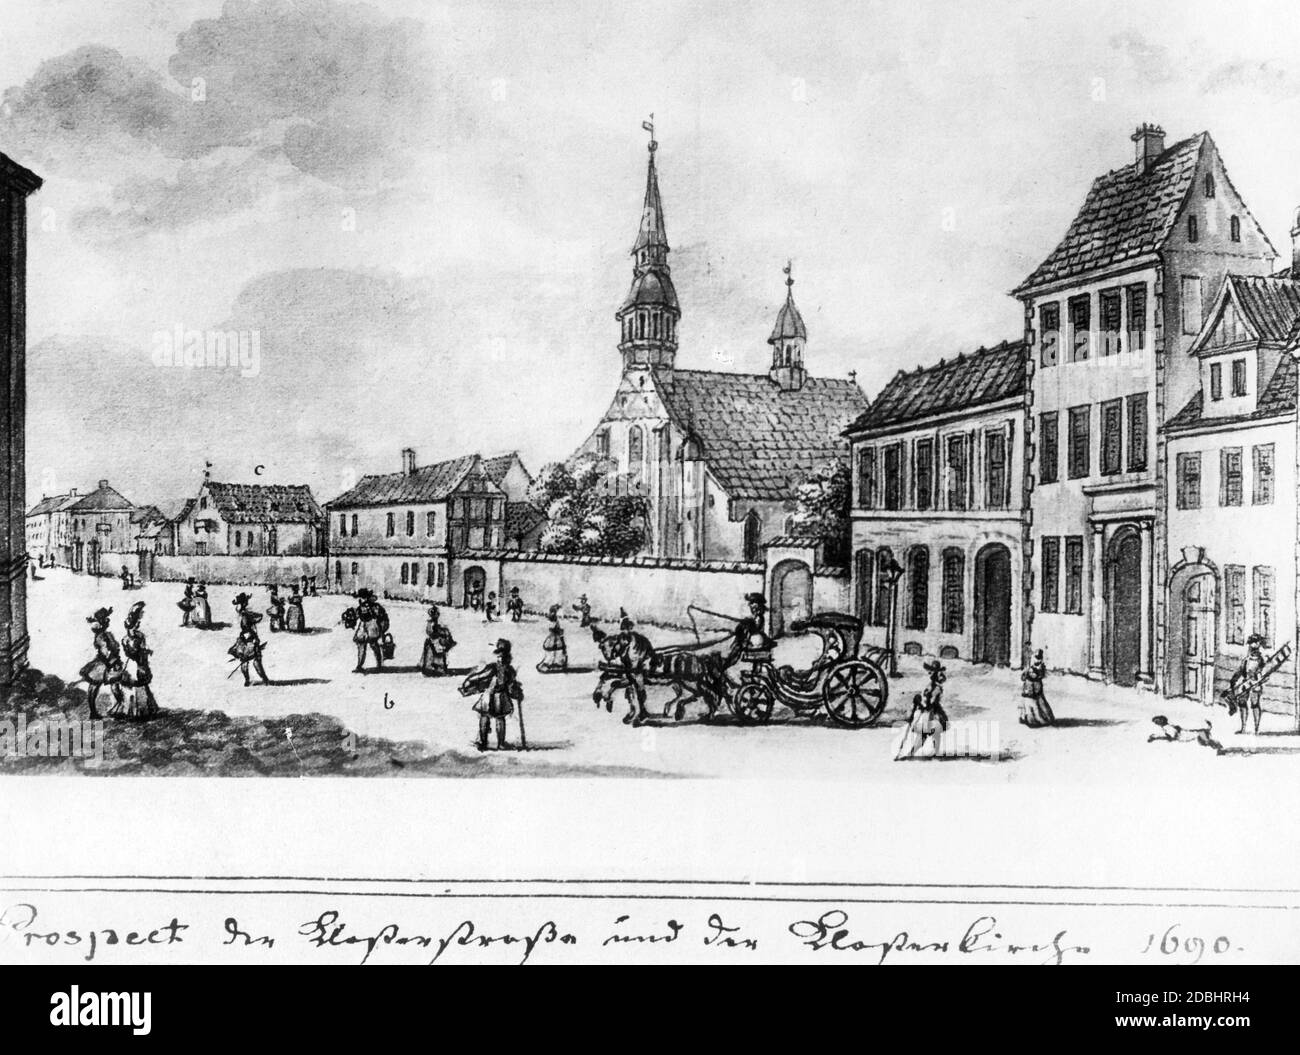 The drawing shows the Franciscan Monastery Church in the Klosterstrasse in Berlin-Mitte around the year 1690. Stock Photo